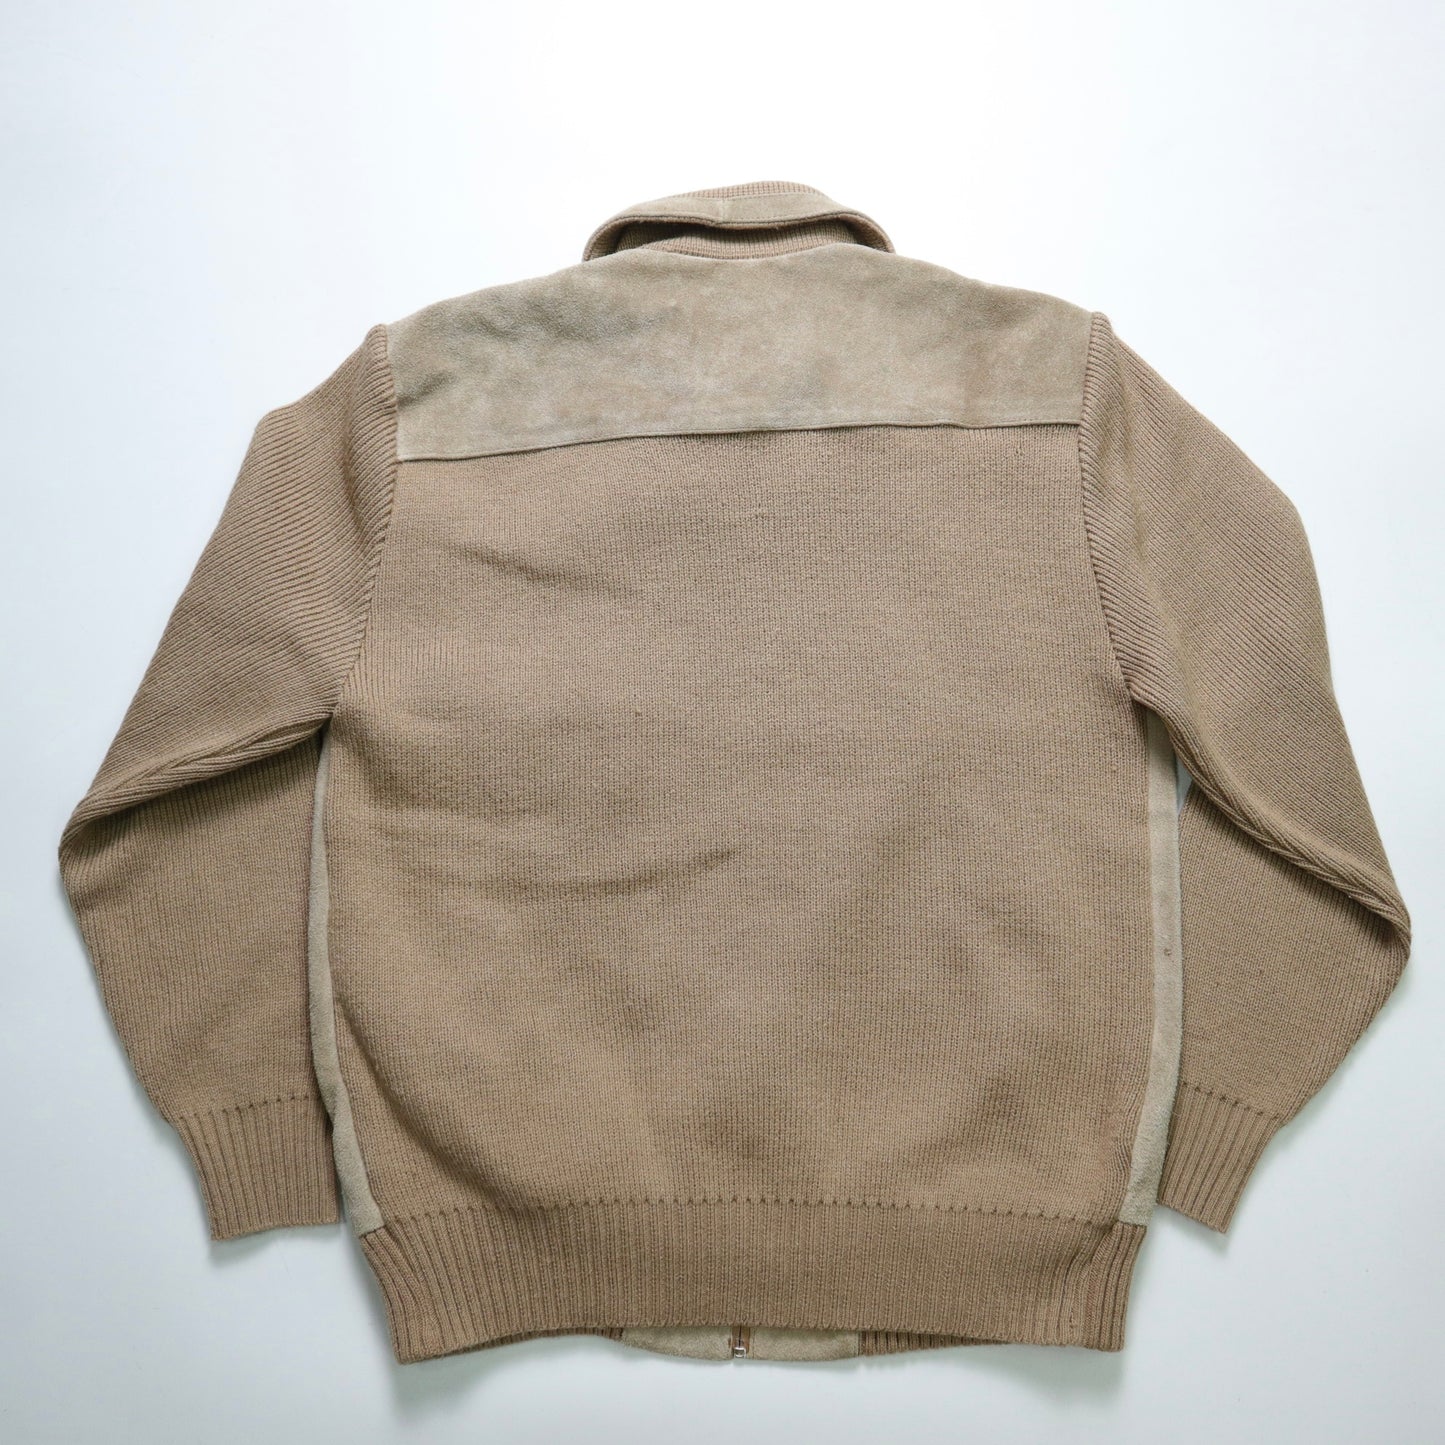 1980s khaki diamond suede jacket with different materials